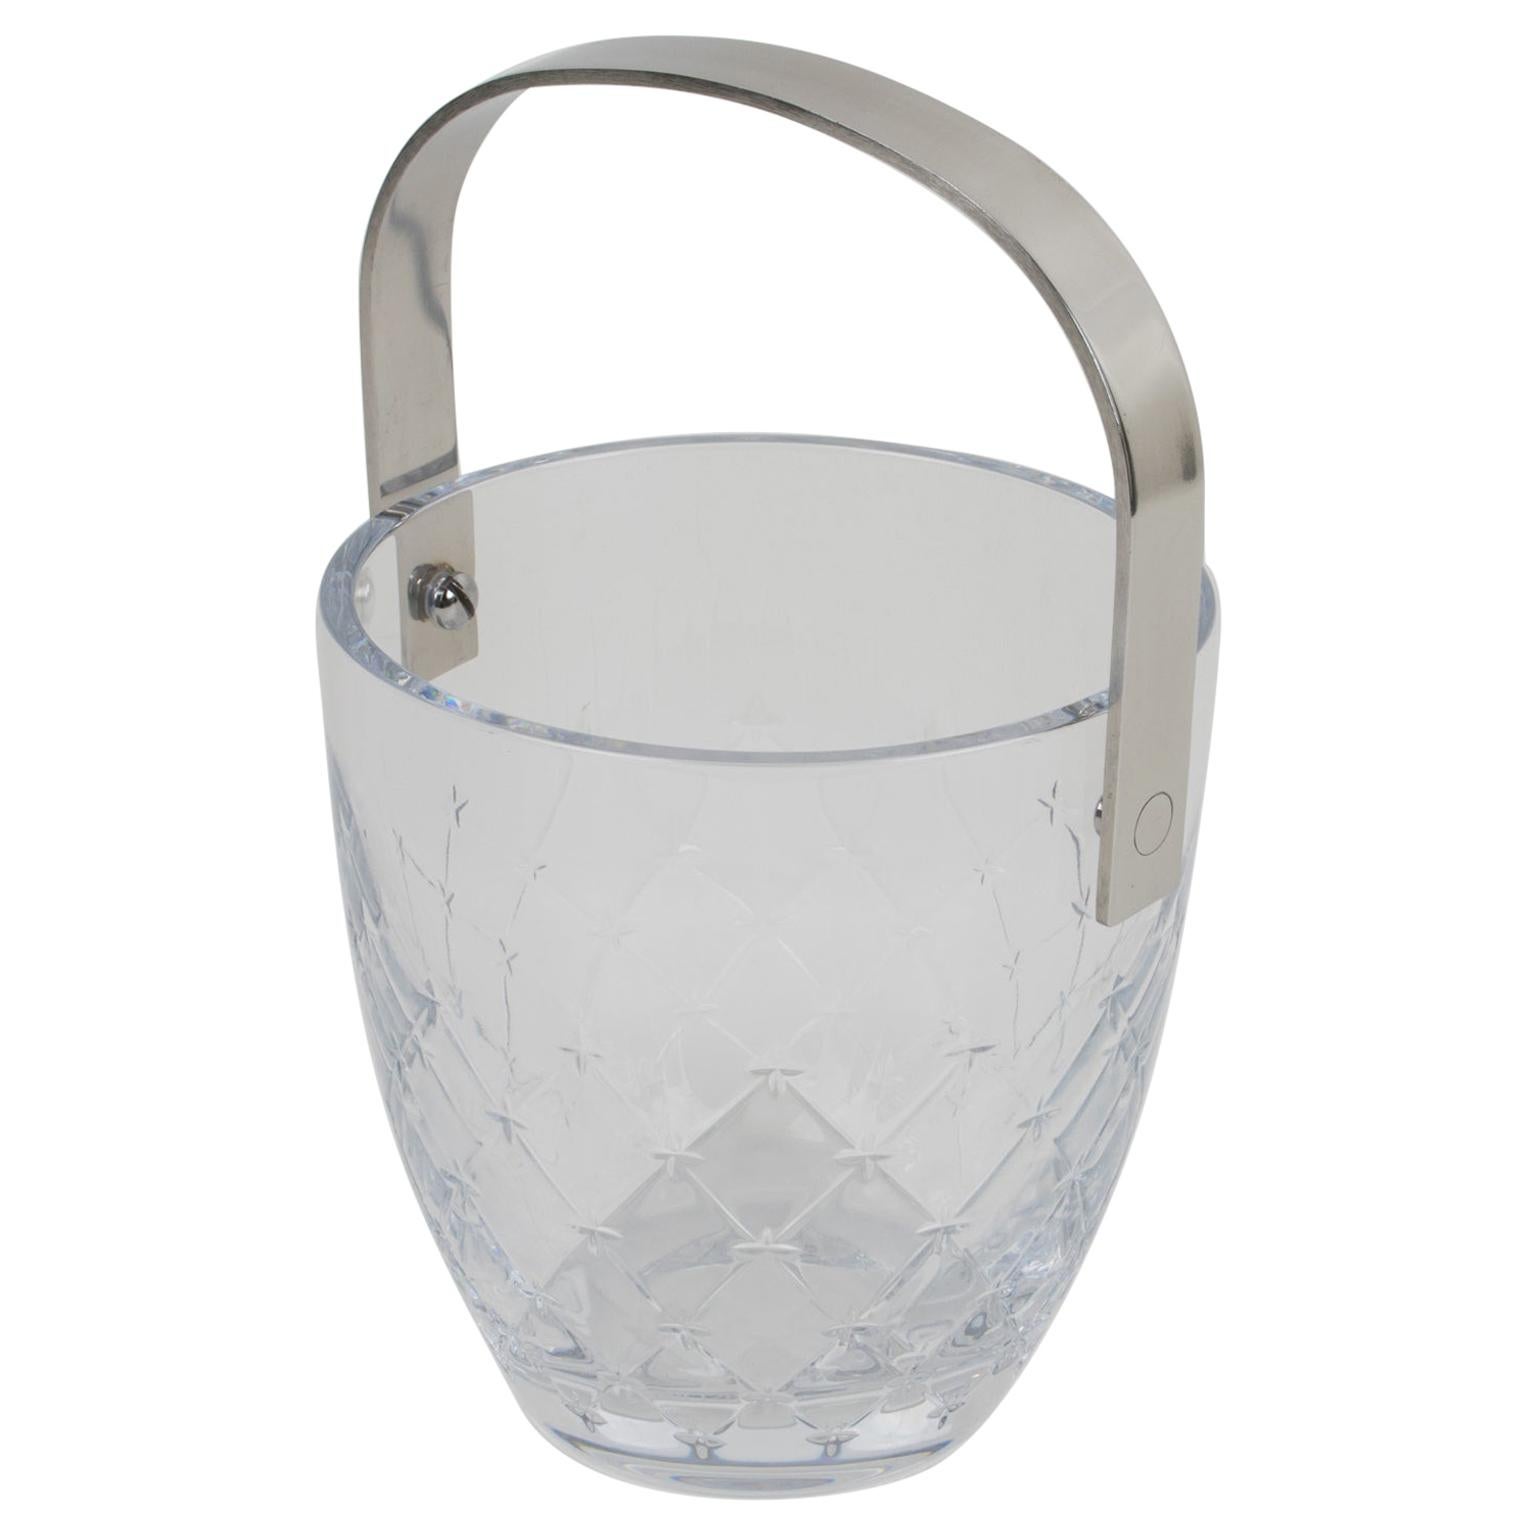 Christian Dior Etched Crystal and Stainless Steel Ice Bucket Cooler